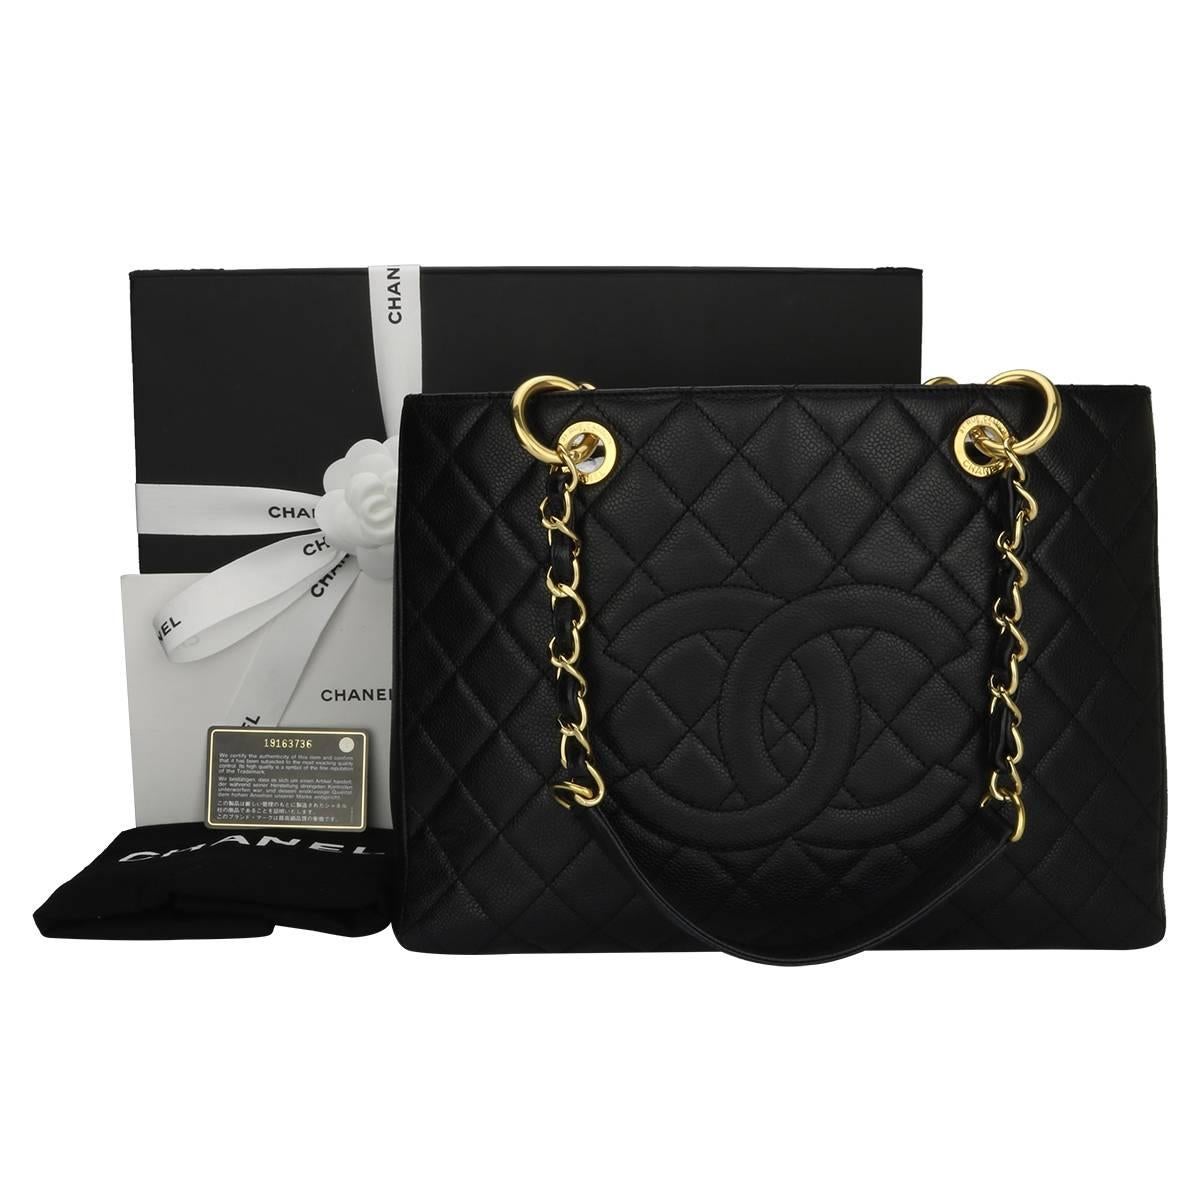 Authentic CHANEL Grand Shopping Tote (GST) Black Caviar with Gold Hardware 2014.

This stunning bag is in a mint condition, the bag still holds its original shape, and the hardware is still very shiny.

Exterior Condition: Mint condition, corners